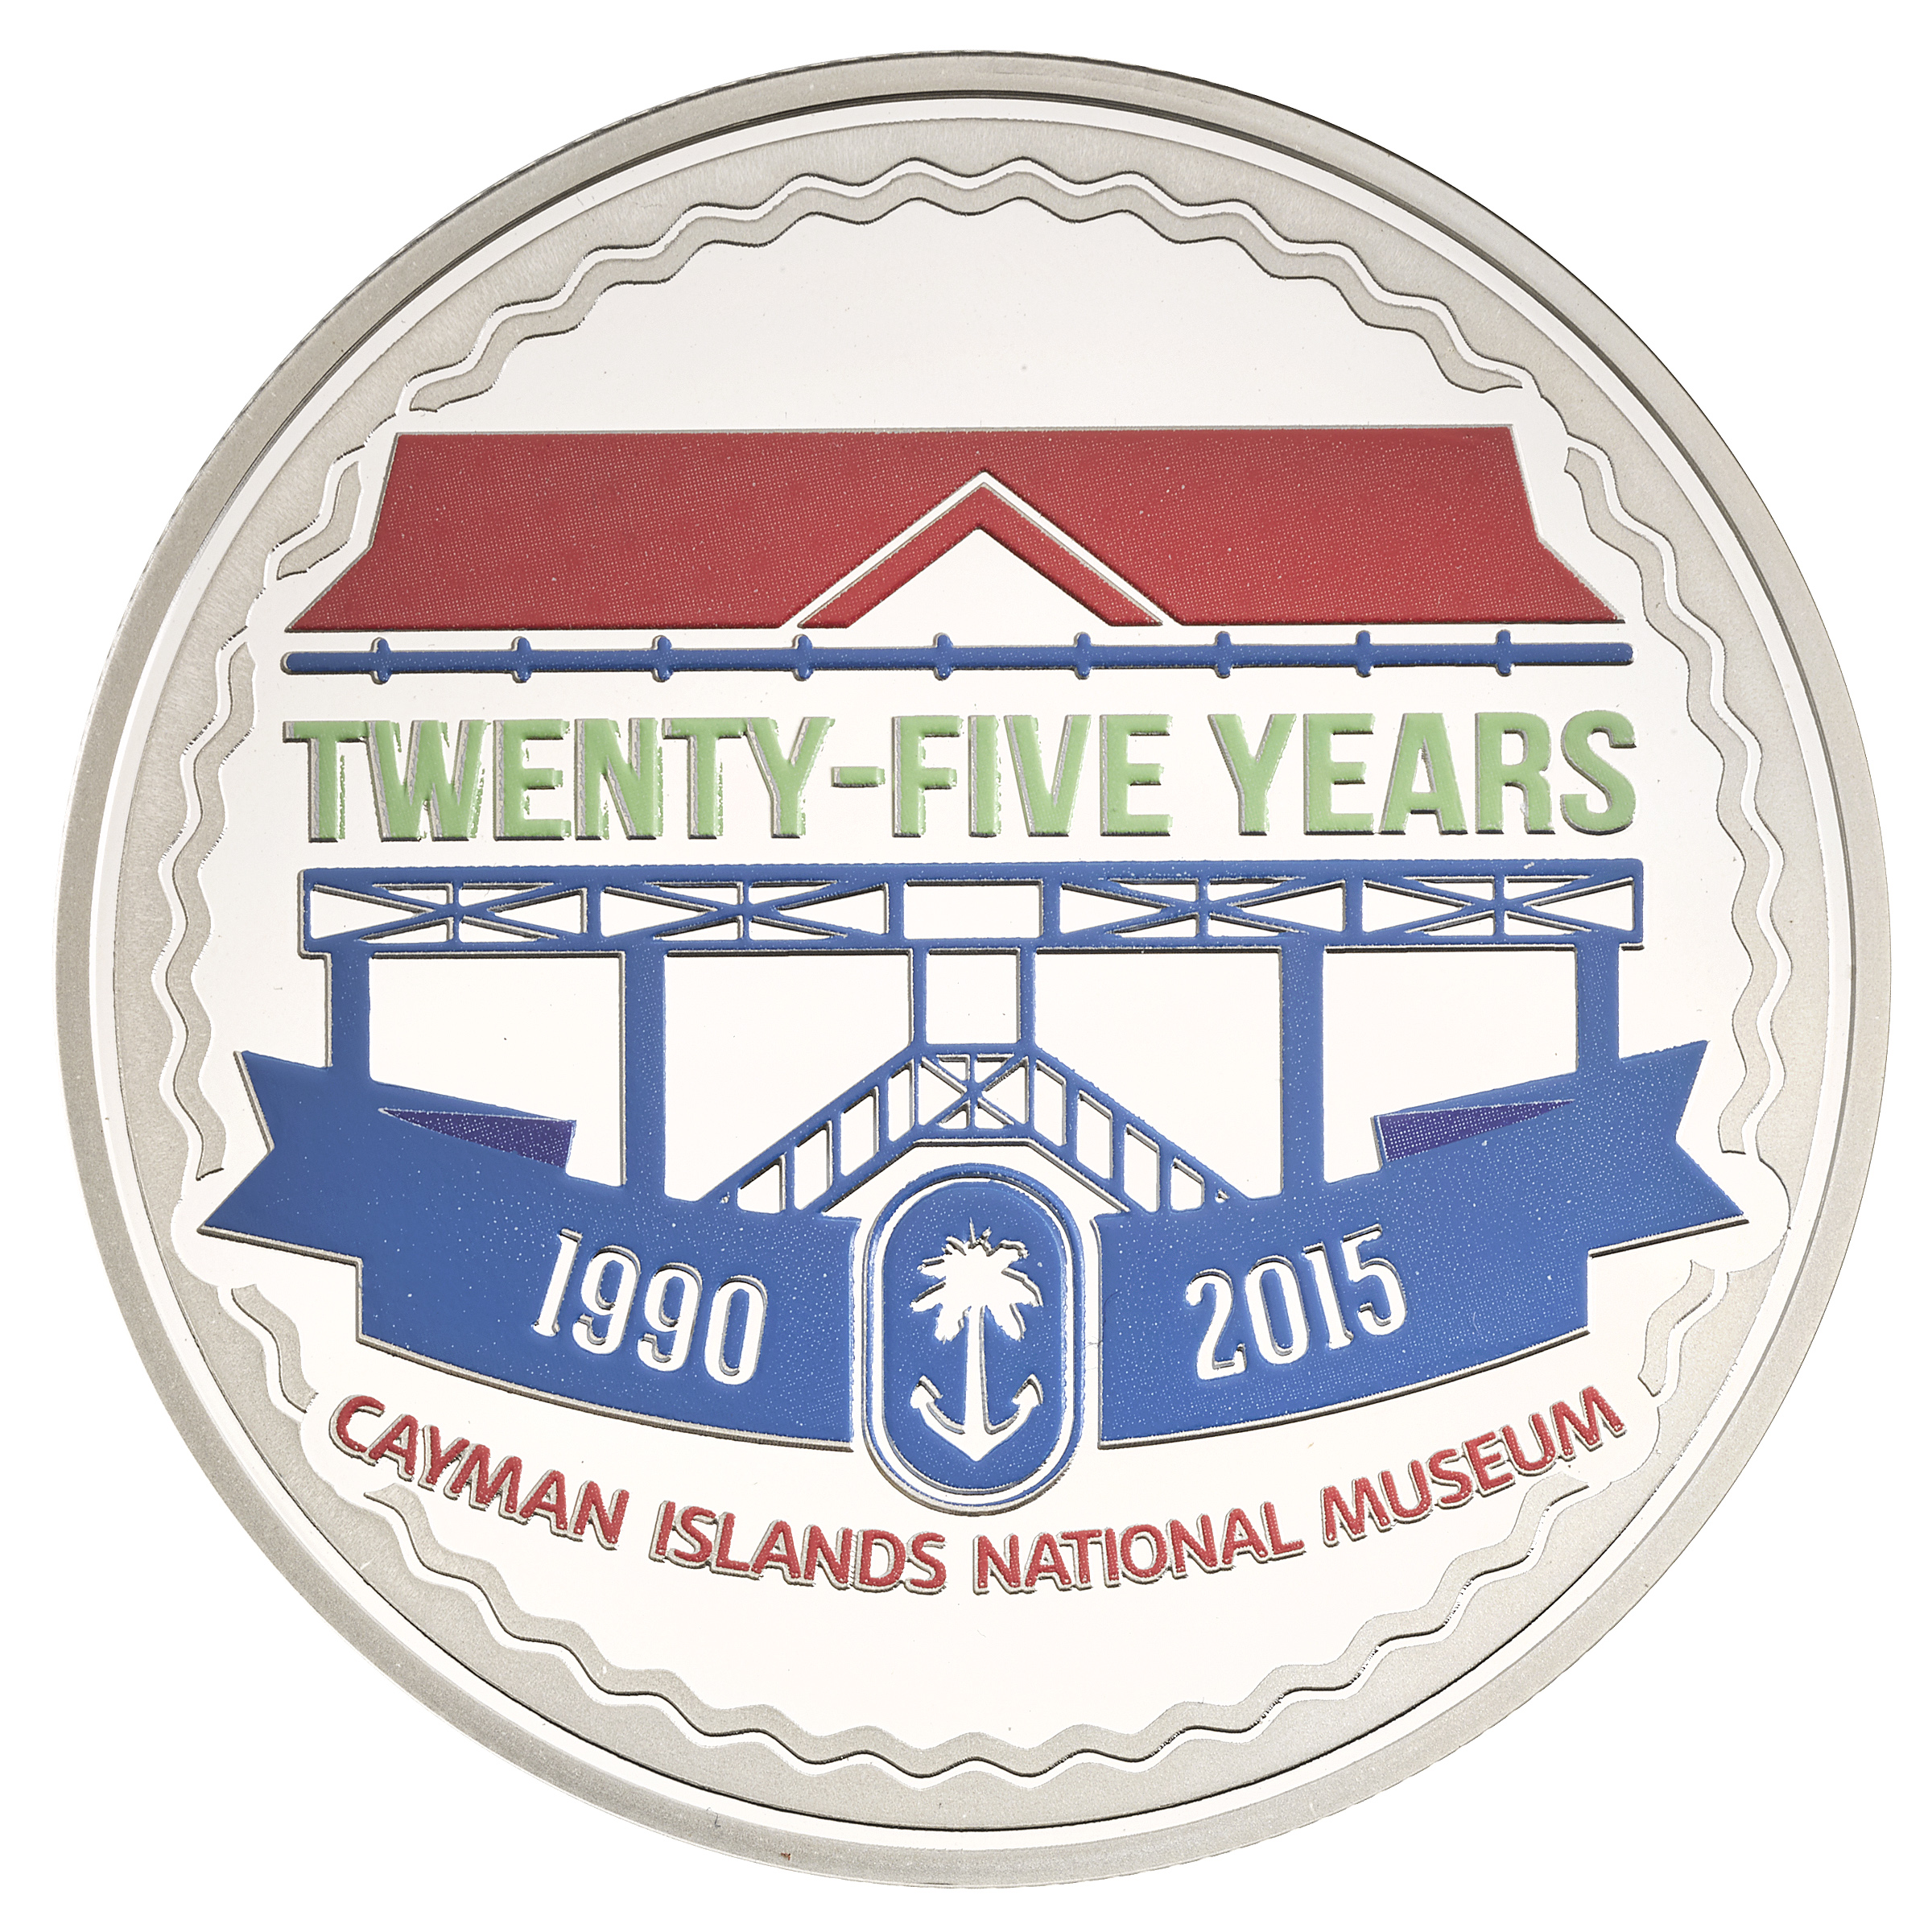 25th Anniversary of the Cayman Islands National Museum